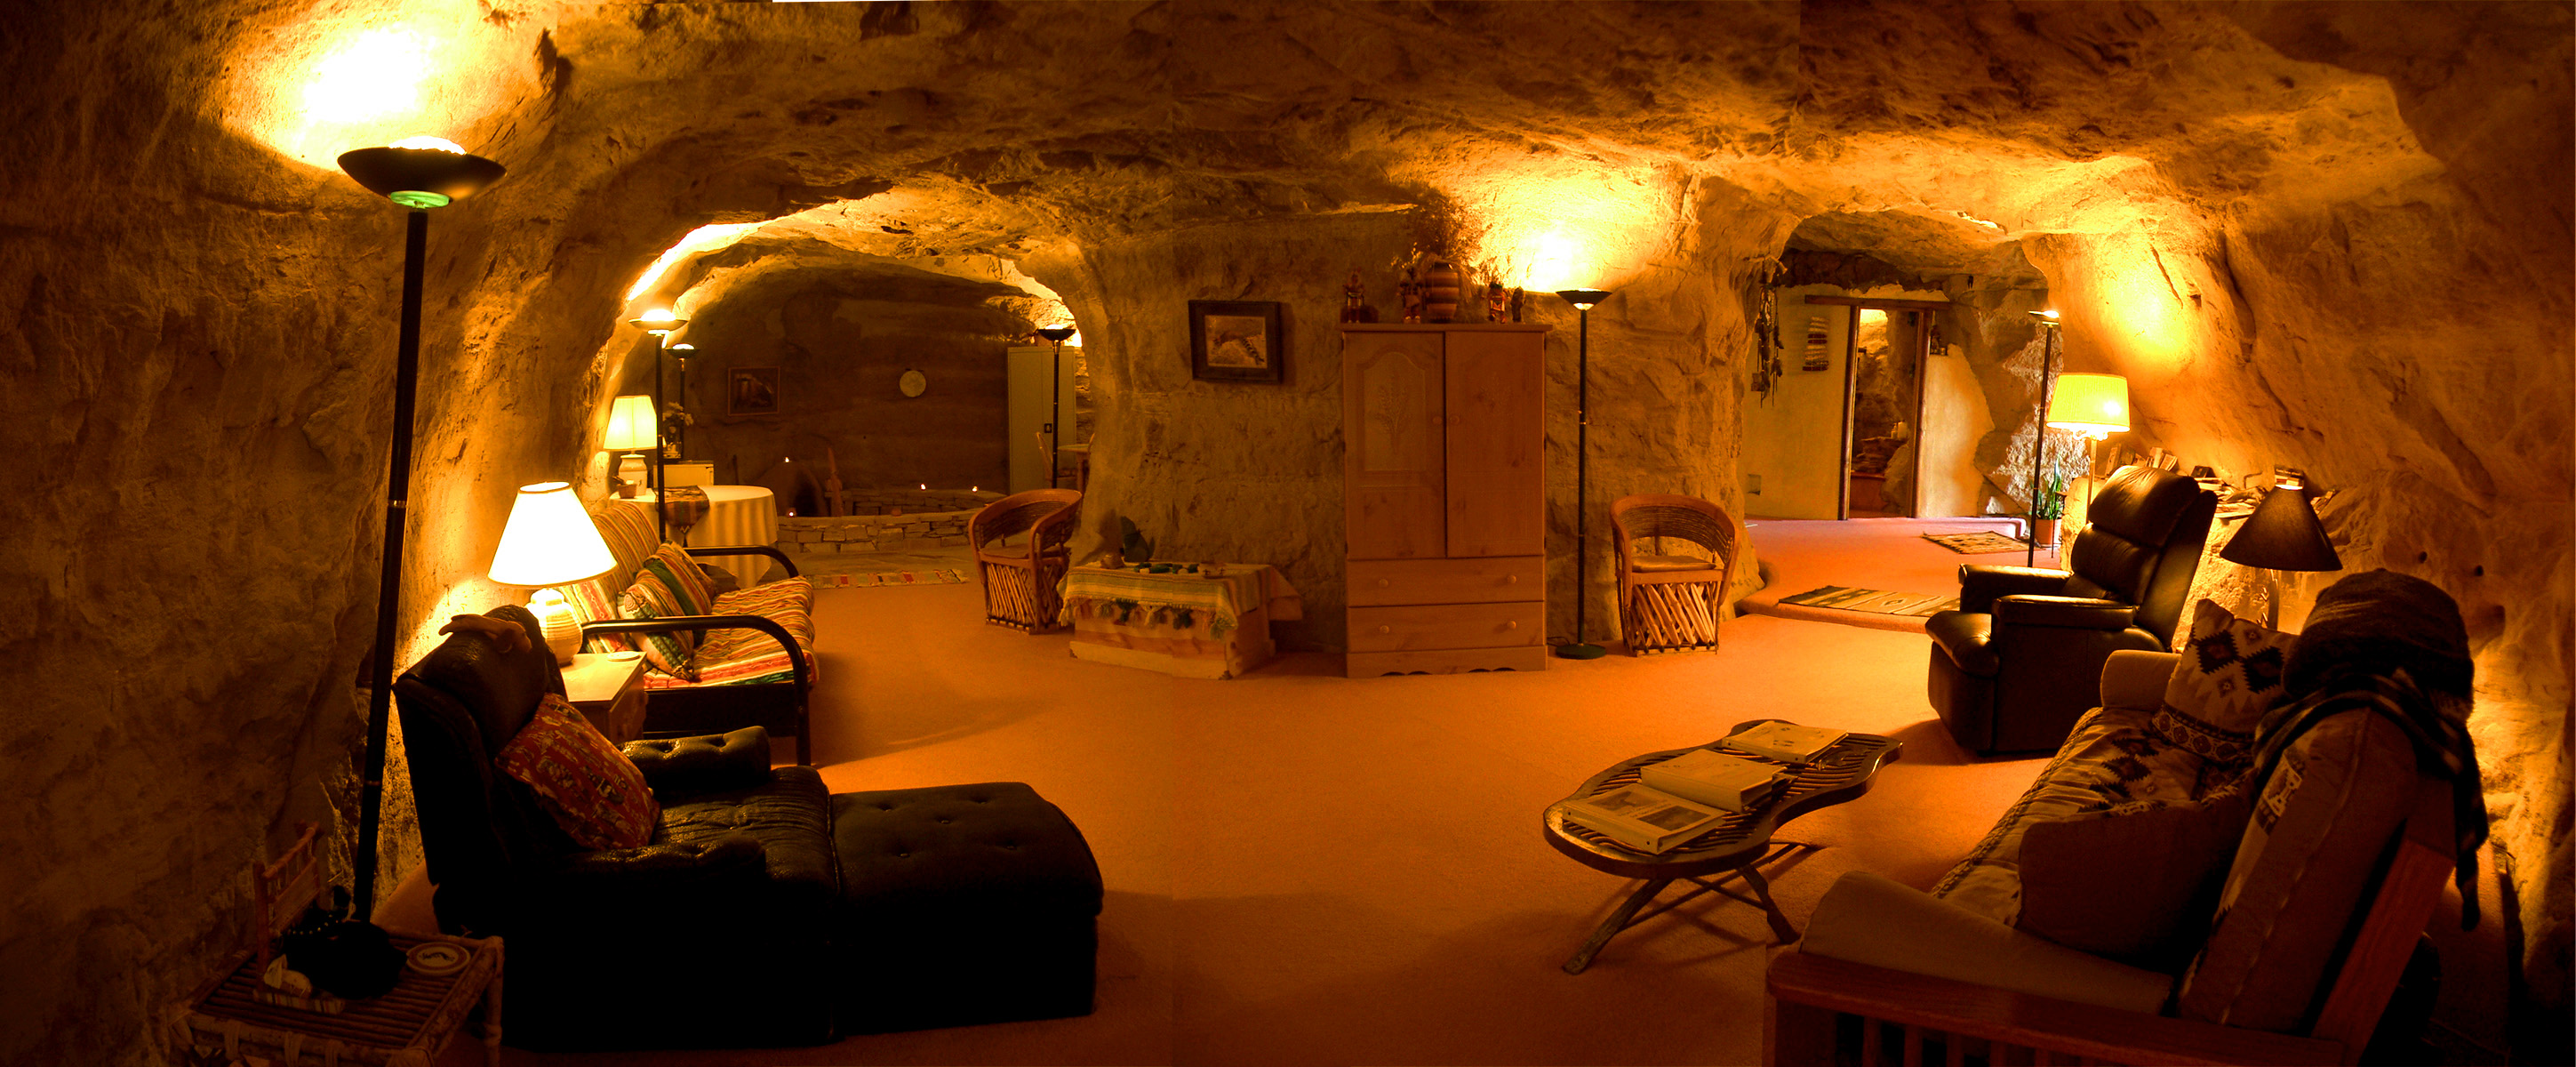 Panoramic view of the main rooms inside Kokopelli’s Cave, carved into solid rock. Photo courtesy Kokopelli’s Cave.